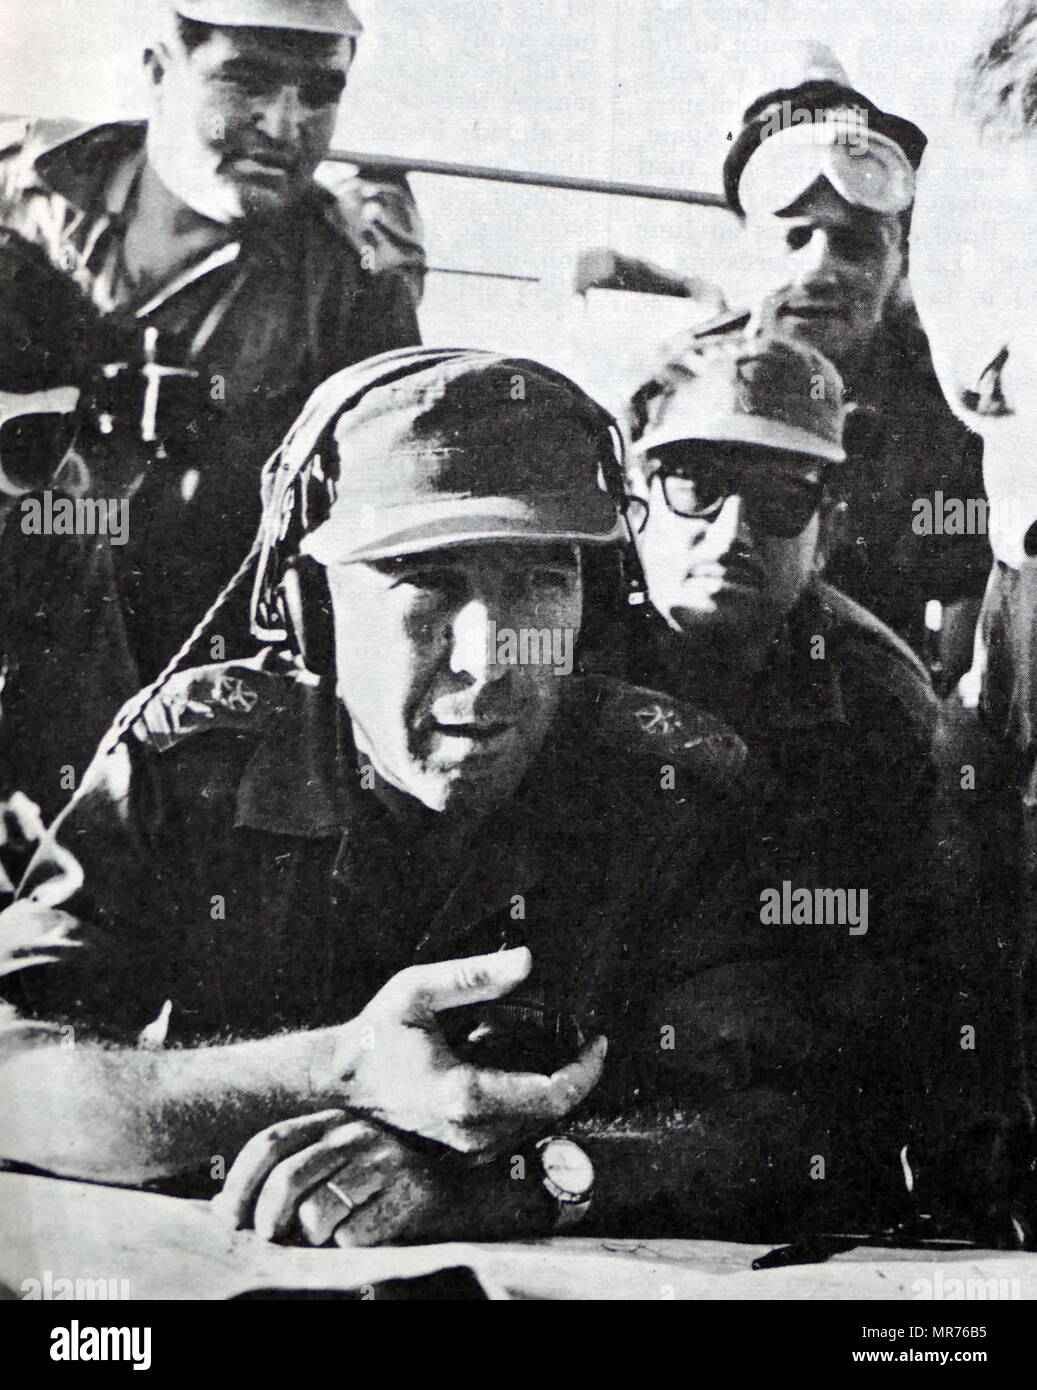 Israel Tal (1924 – 2010), Israel Defense Forces (IDF) general known for his skills in tank warfare. armoured-division commander in Sinai Peninsula during the Six-Day War, and commander of the southern front during the final stages of the Yom Kippur War. Tal was the creator of the Israeli armoured doctrine that led to the Israeli successes in the Sinai surprise attack of the Six-Day War. In 1964, General Tal took over the Israeli armoured corps and organized it into the leading element of the Israeli Defense Forces, characterized by high mobility and relentless assault Stock Photo